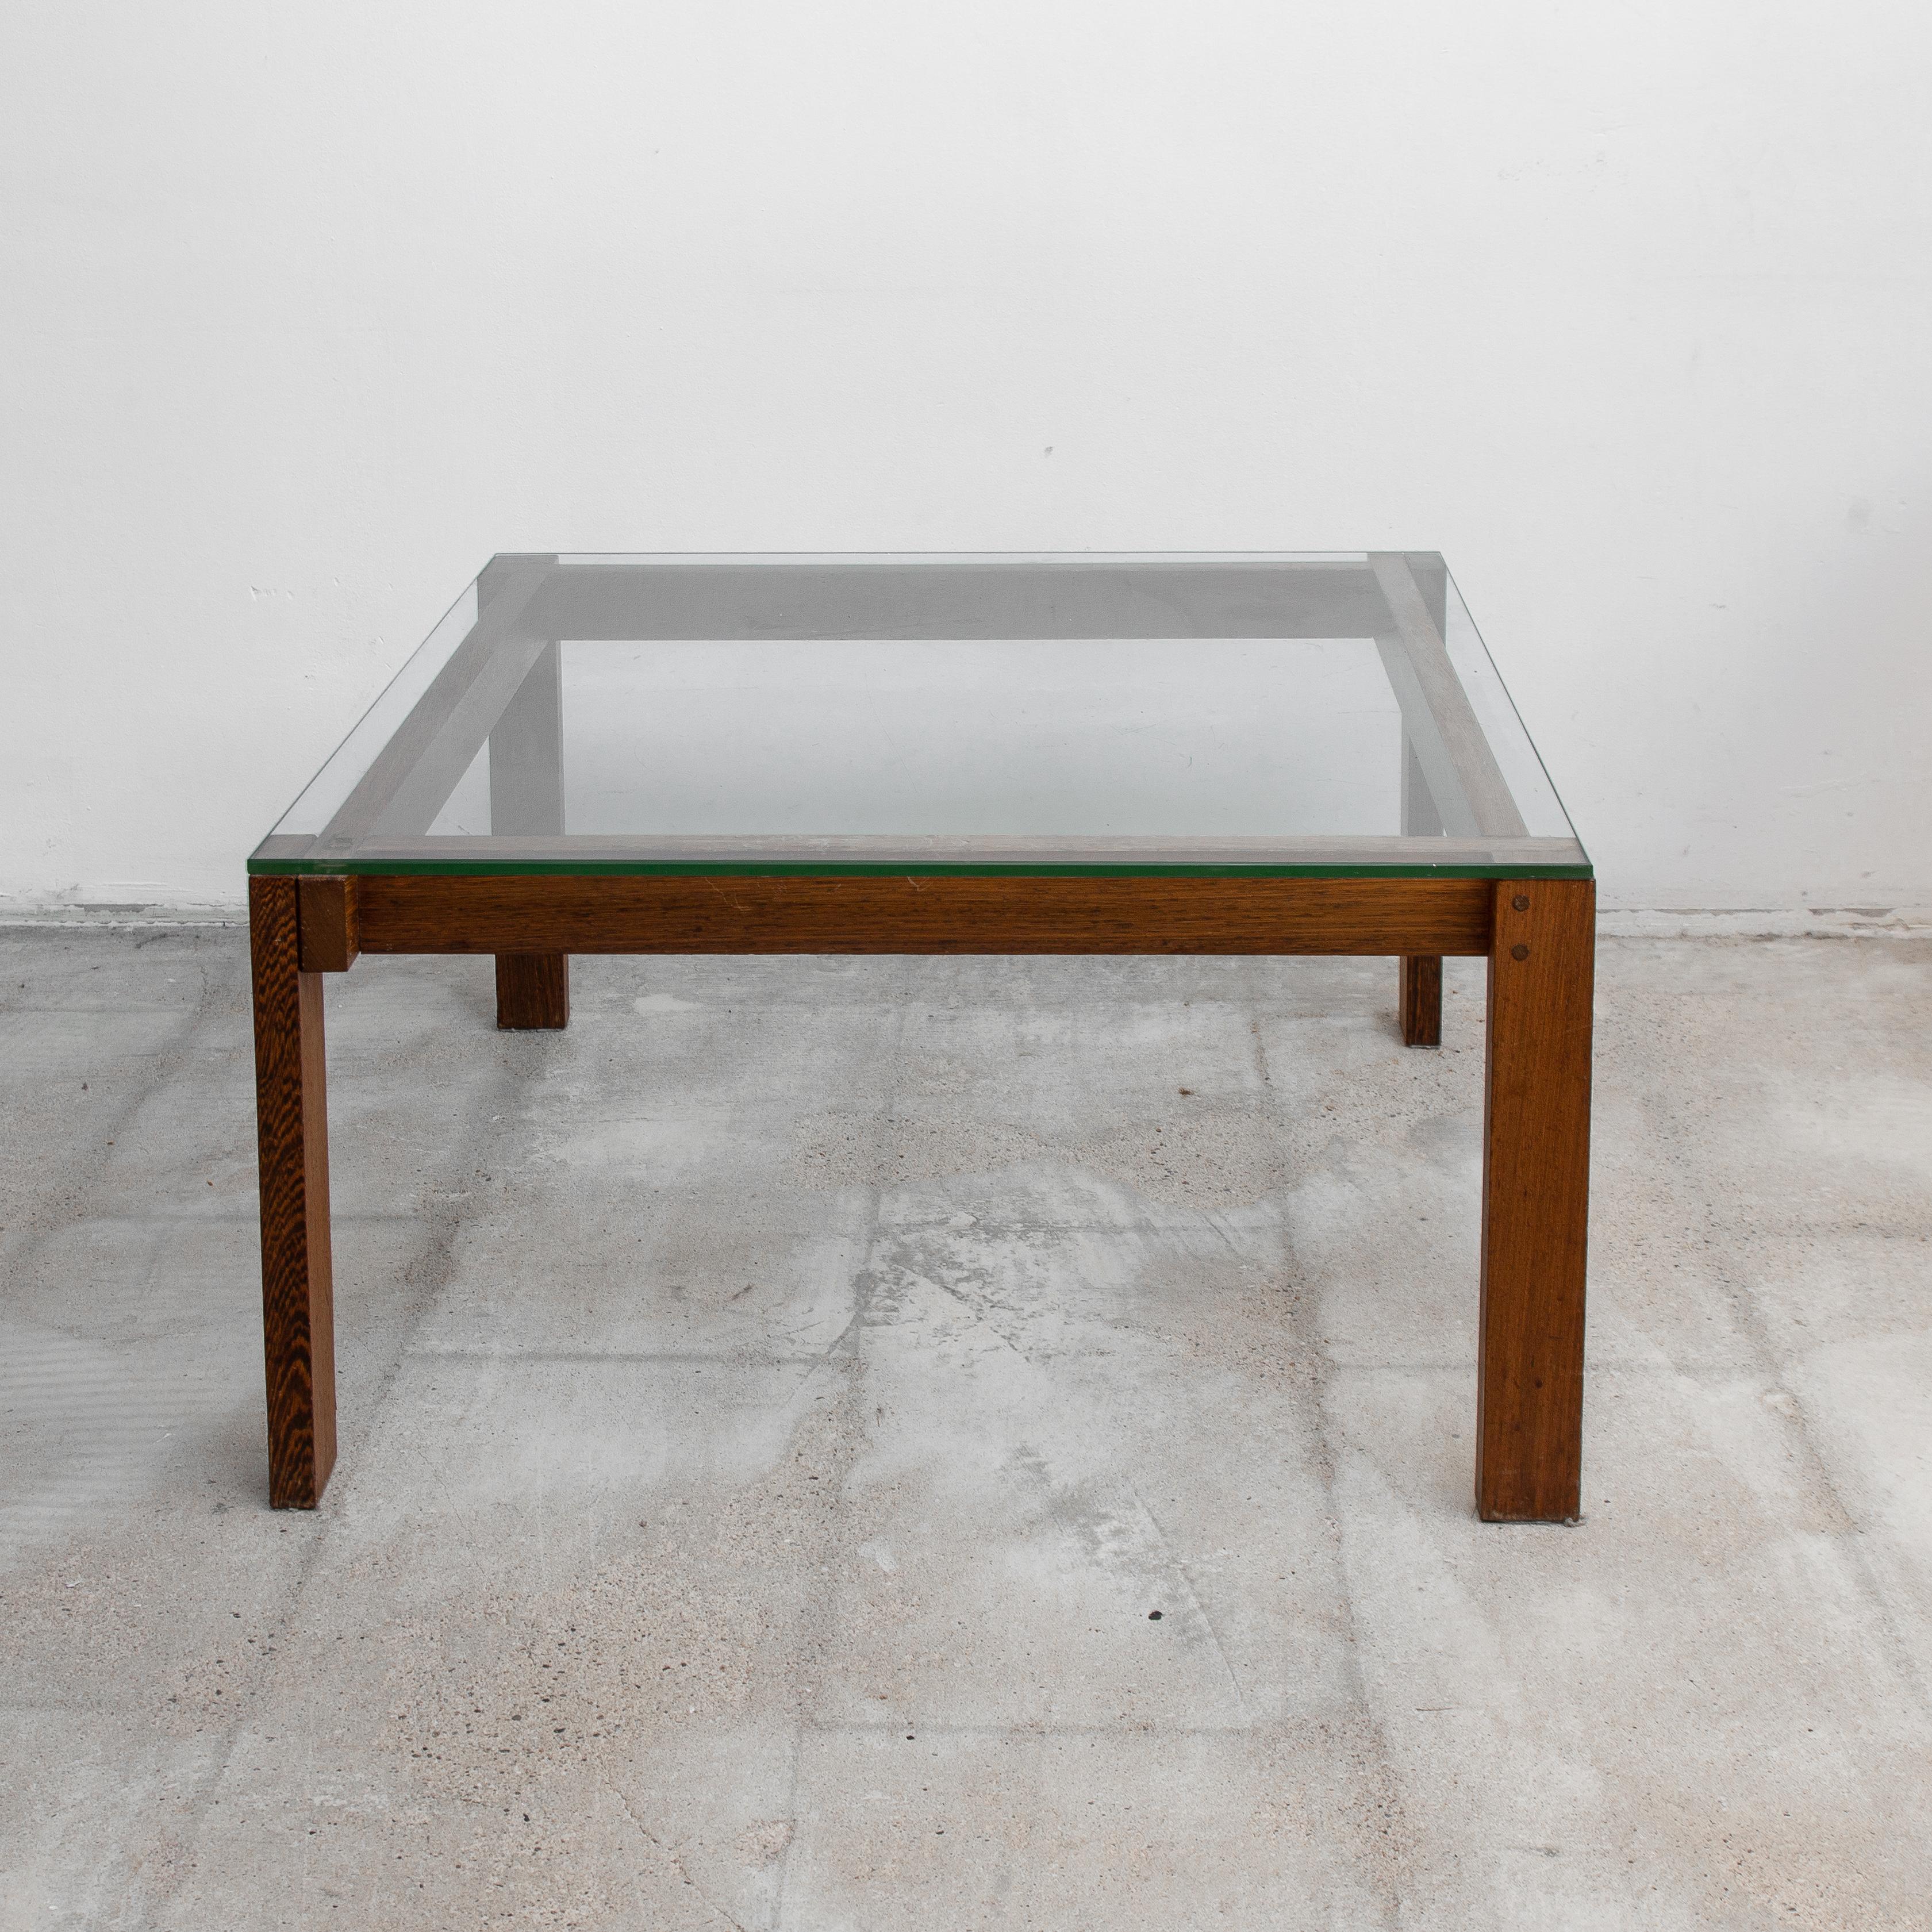 A nice midcentury coffee table, with an elegant look and finished Wengé wood. Typical Japanese style. This piece is much more stunning in person and can be viewed in our showroom in Amsterdam 1960s.